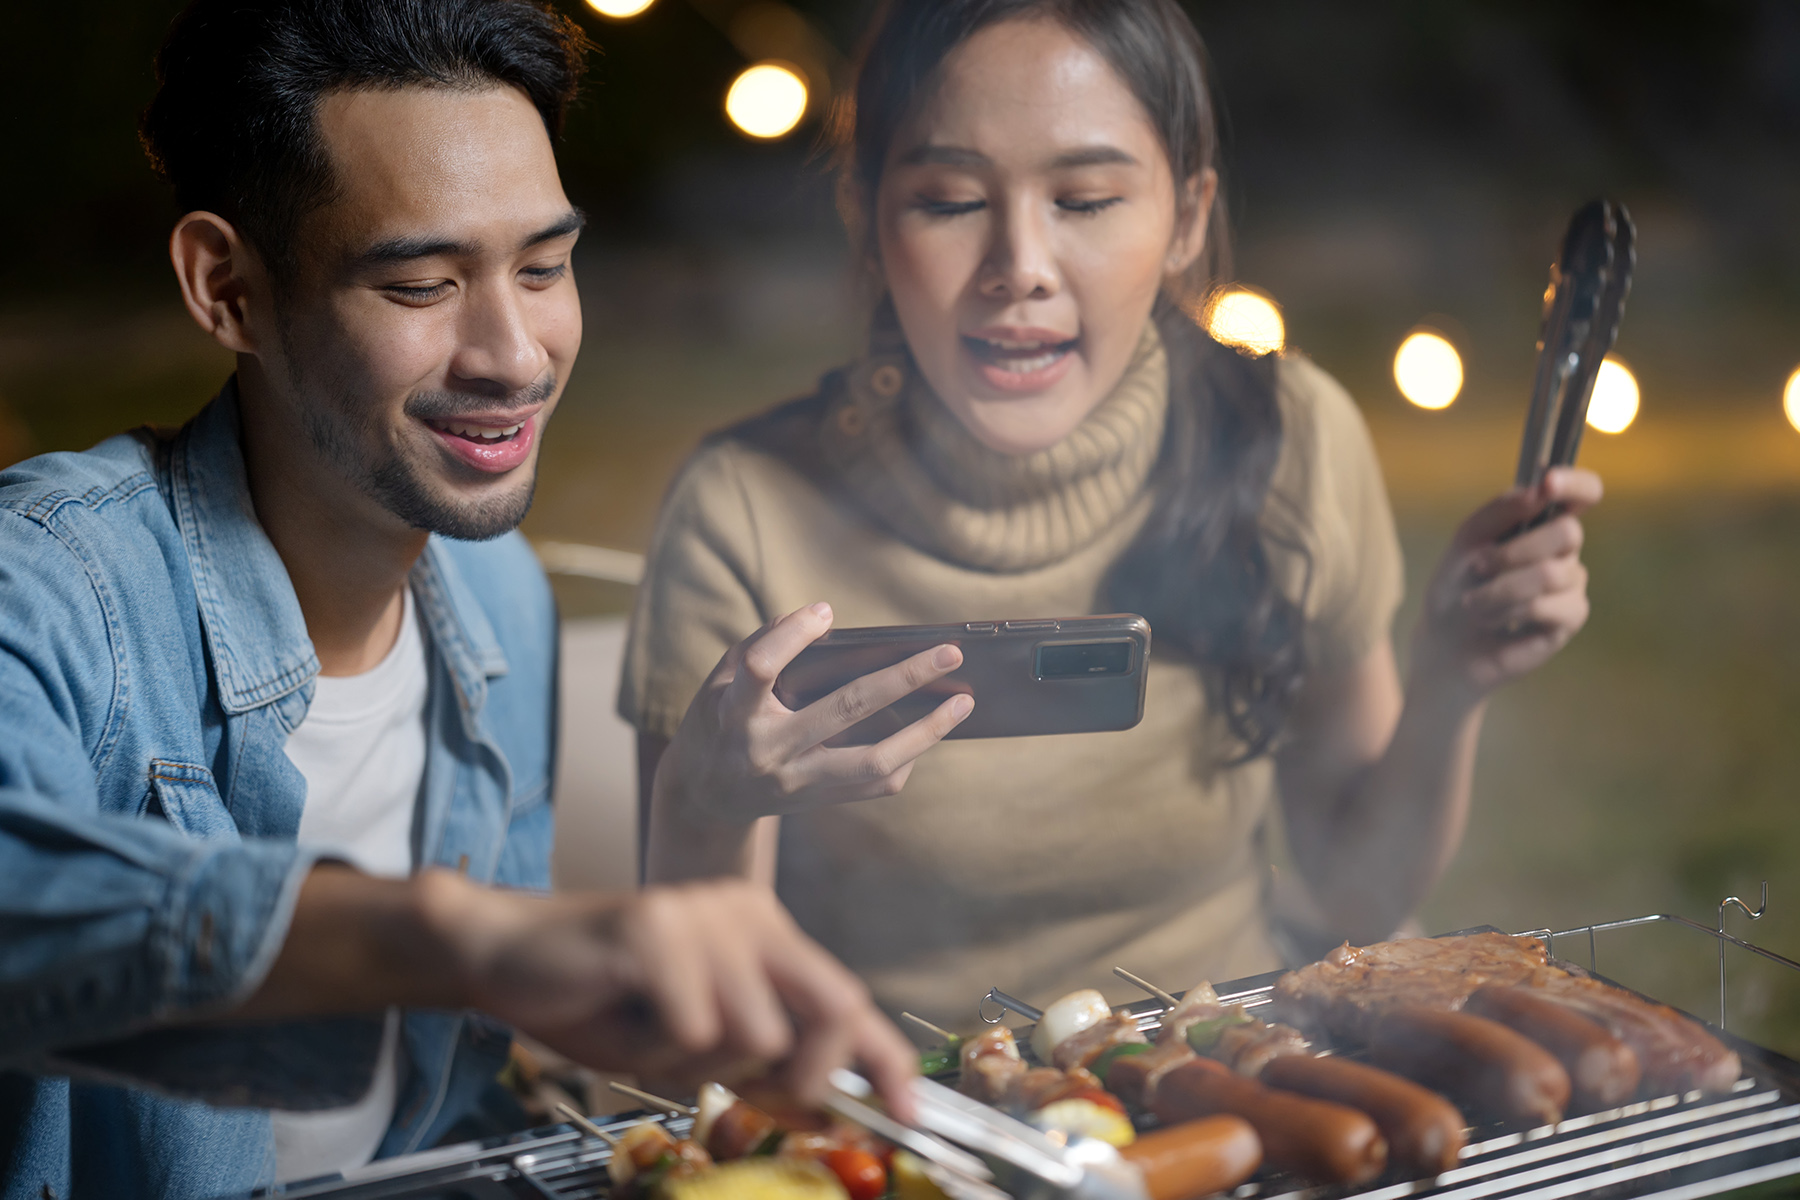 A couple barbecues, the woman films it on her mobile phone